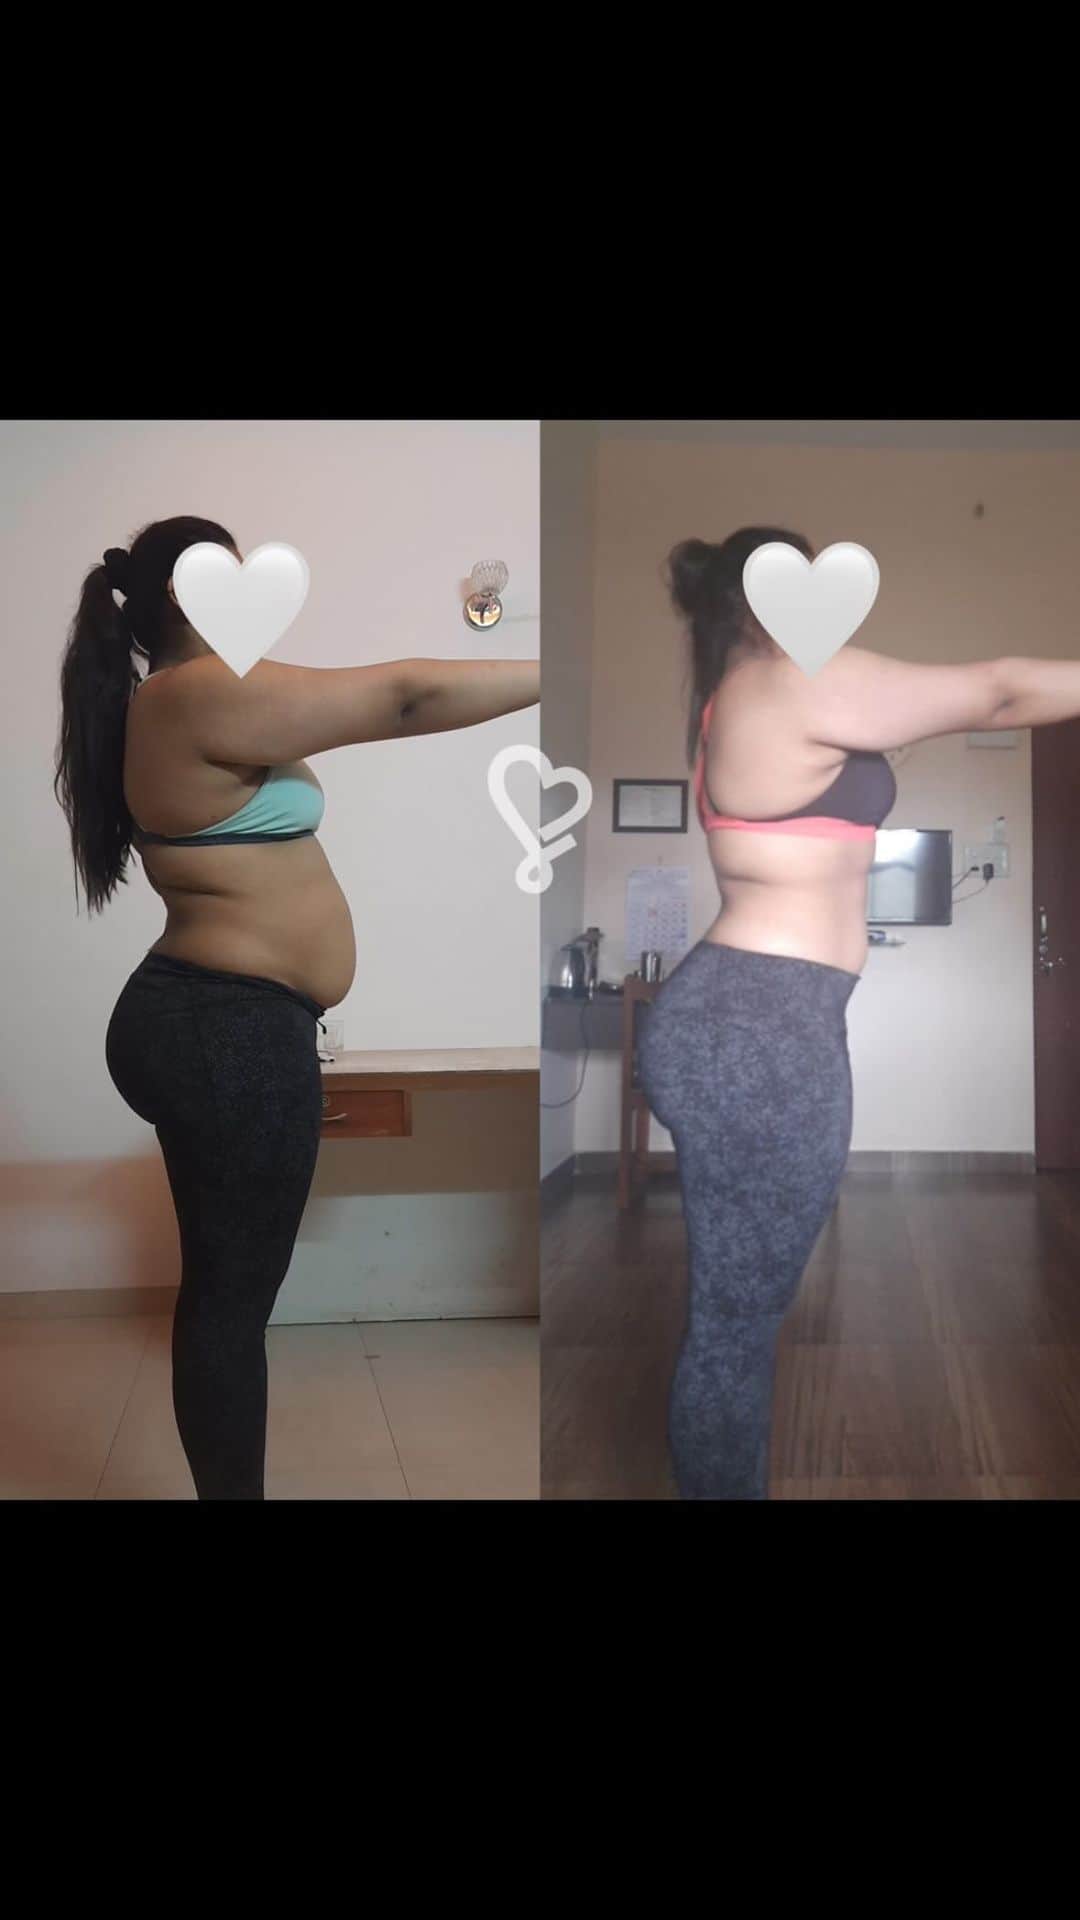 アンナ・ニコル・スミスのインスタグラム：「8 WEEKS!! 🤯 here’s how she did it!! 👇  Congratulations to @mahika_fbg for being our 8 week challenge winner!!   She followed a mix of @fitbodyapp Tone and Shred and made major changes to her diet (like prioritizing protein and veggies, otherwise eating balanced and 80/20 so she could still enjoy life and going out with friends!!)  Our next @fitbodyapp challenge will be announced on an insta live this week! Check my stories for when so you can RSVP 🤍  Here’s what else @mahika_fbg said about her journey:  “This 8 week challenge has truly been life transforming for me. I have personally struggled with binge eating for the past 6 years of my life and I have started many lifestyle changes over and over. The starting and stopping had become a vicious cycle.   But this 8 week challenge motivated me to be consistent and it completely changed my outlook on health and fitness. I have COMPLETELY STOPPED BINGE EATING.   Now when I exercise and work out it is not to look a certain way for other people. It is purely for myself and my health.  Every time I workout, I remind myself that I am doing this out of love and care for my body.  Now when I look in the mirror, instead of criticizing myself, I focus on the things I like about myself and praise myself.   When I purchased the @fitbodyapp subscription in December for the whole of 2023, this was a commitment to myself, to my body, my soul and my mind that I will look after myself and be consistent.  Since I started the eight week challenge I have LOST 10 KGS OF WEIGHT/ 22 POUNDS! And the best part is that working out has become a permanent part of my life!”  To whoever is reading this and ready to make a change… don’t wait. There’s no magical time to start, not even at the start of a challenge.   If you’re ready to dive in, you can try my @fitbodyapp free for the first 7 days before fully committing. Link is in the @fitbodyapp bio! 💕💪  #transformation #8weekprogress #fitbody2023 #annavictoria #fitbodyapp」